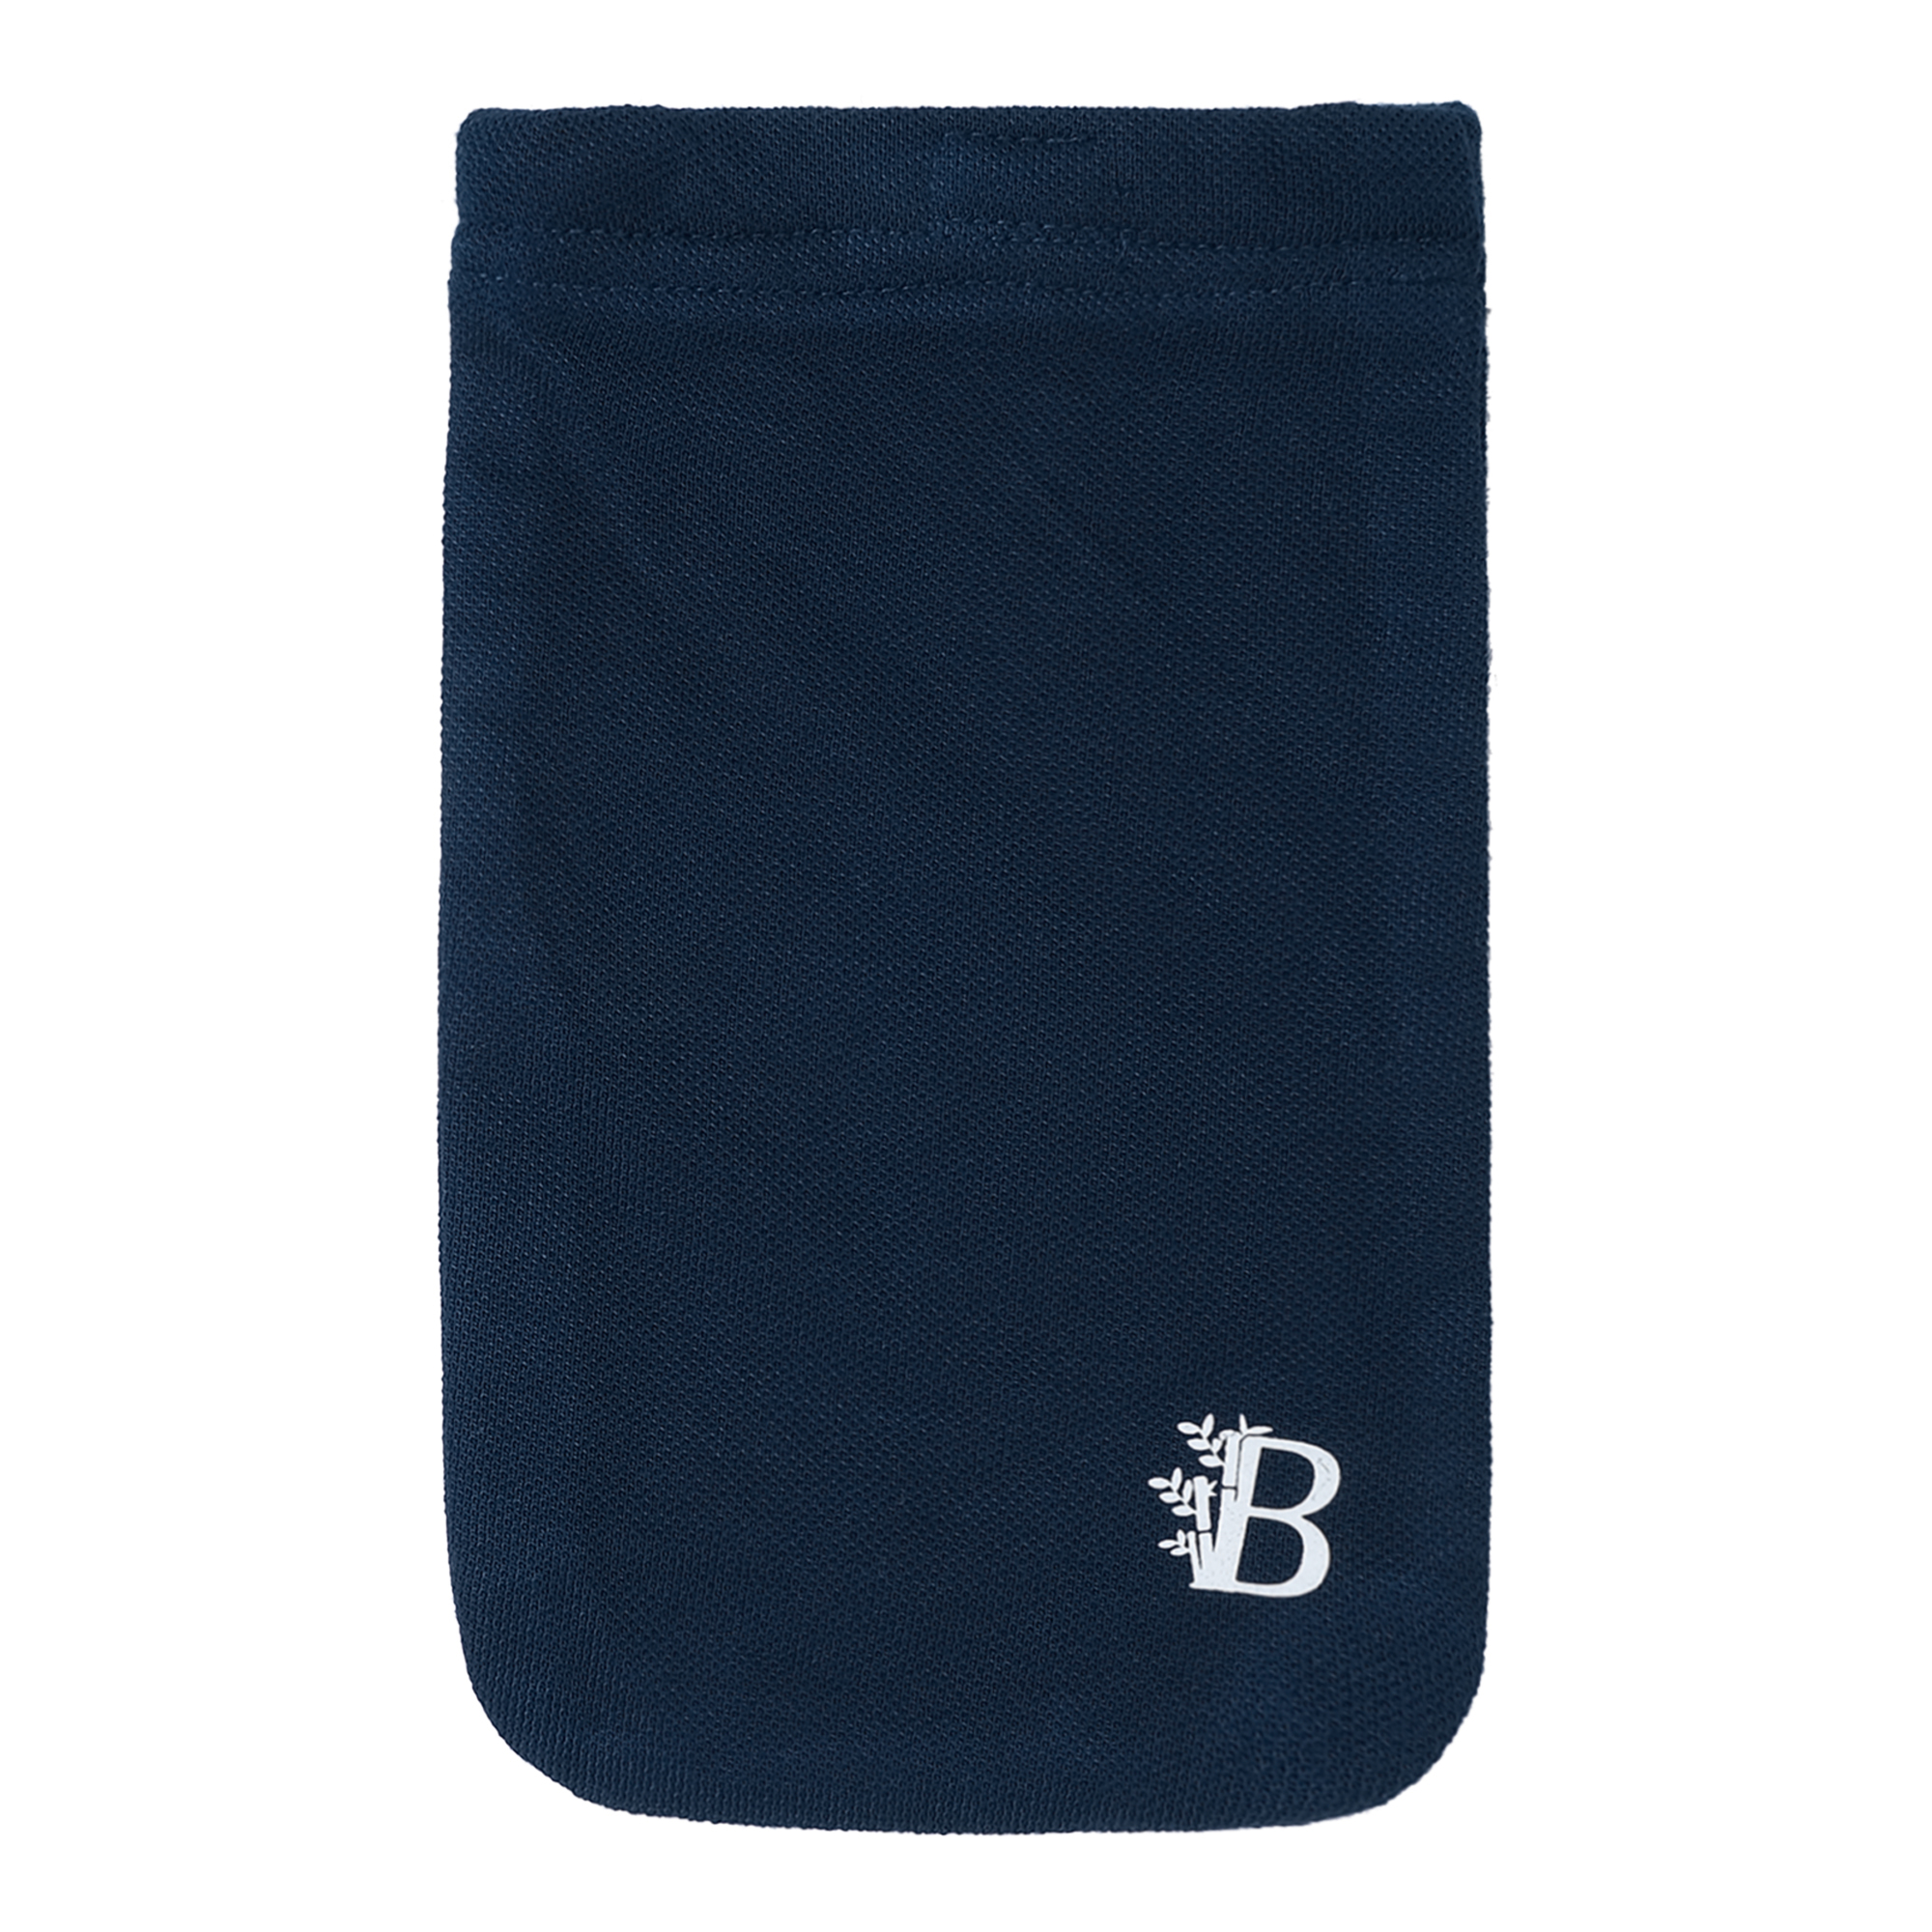 Product: Bamboo Fabric Unisex | Mobile cover